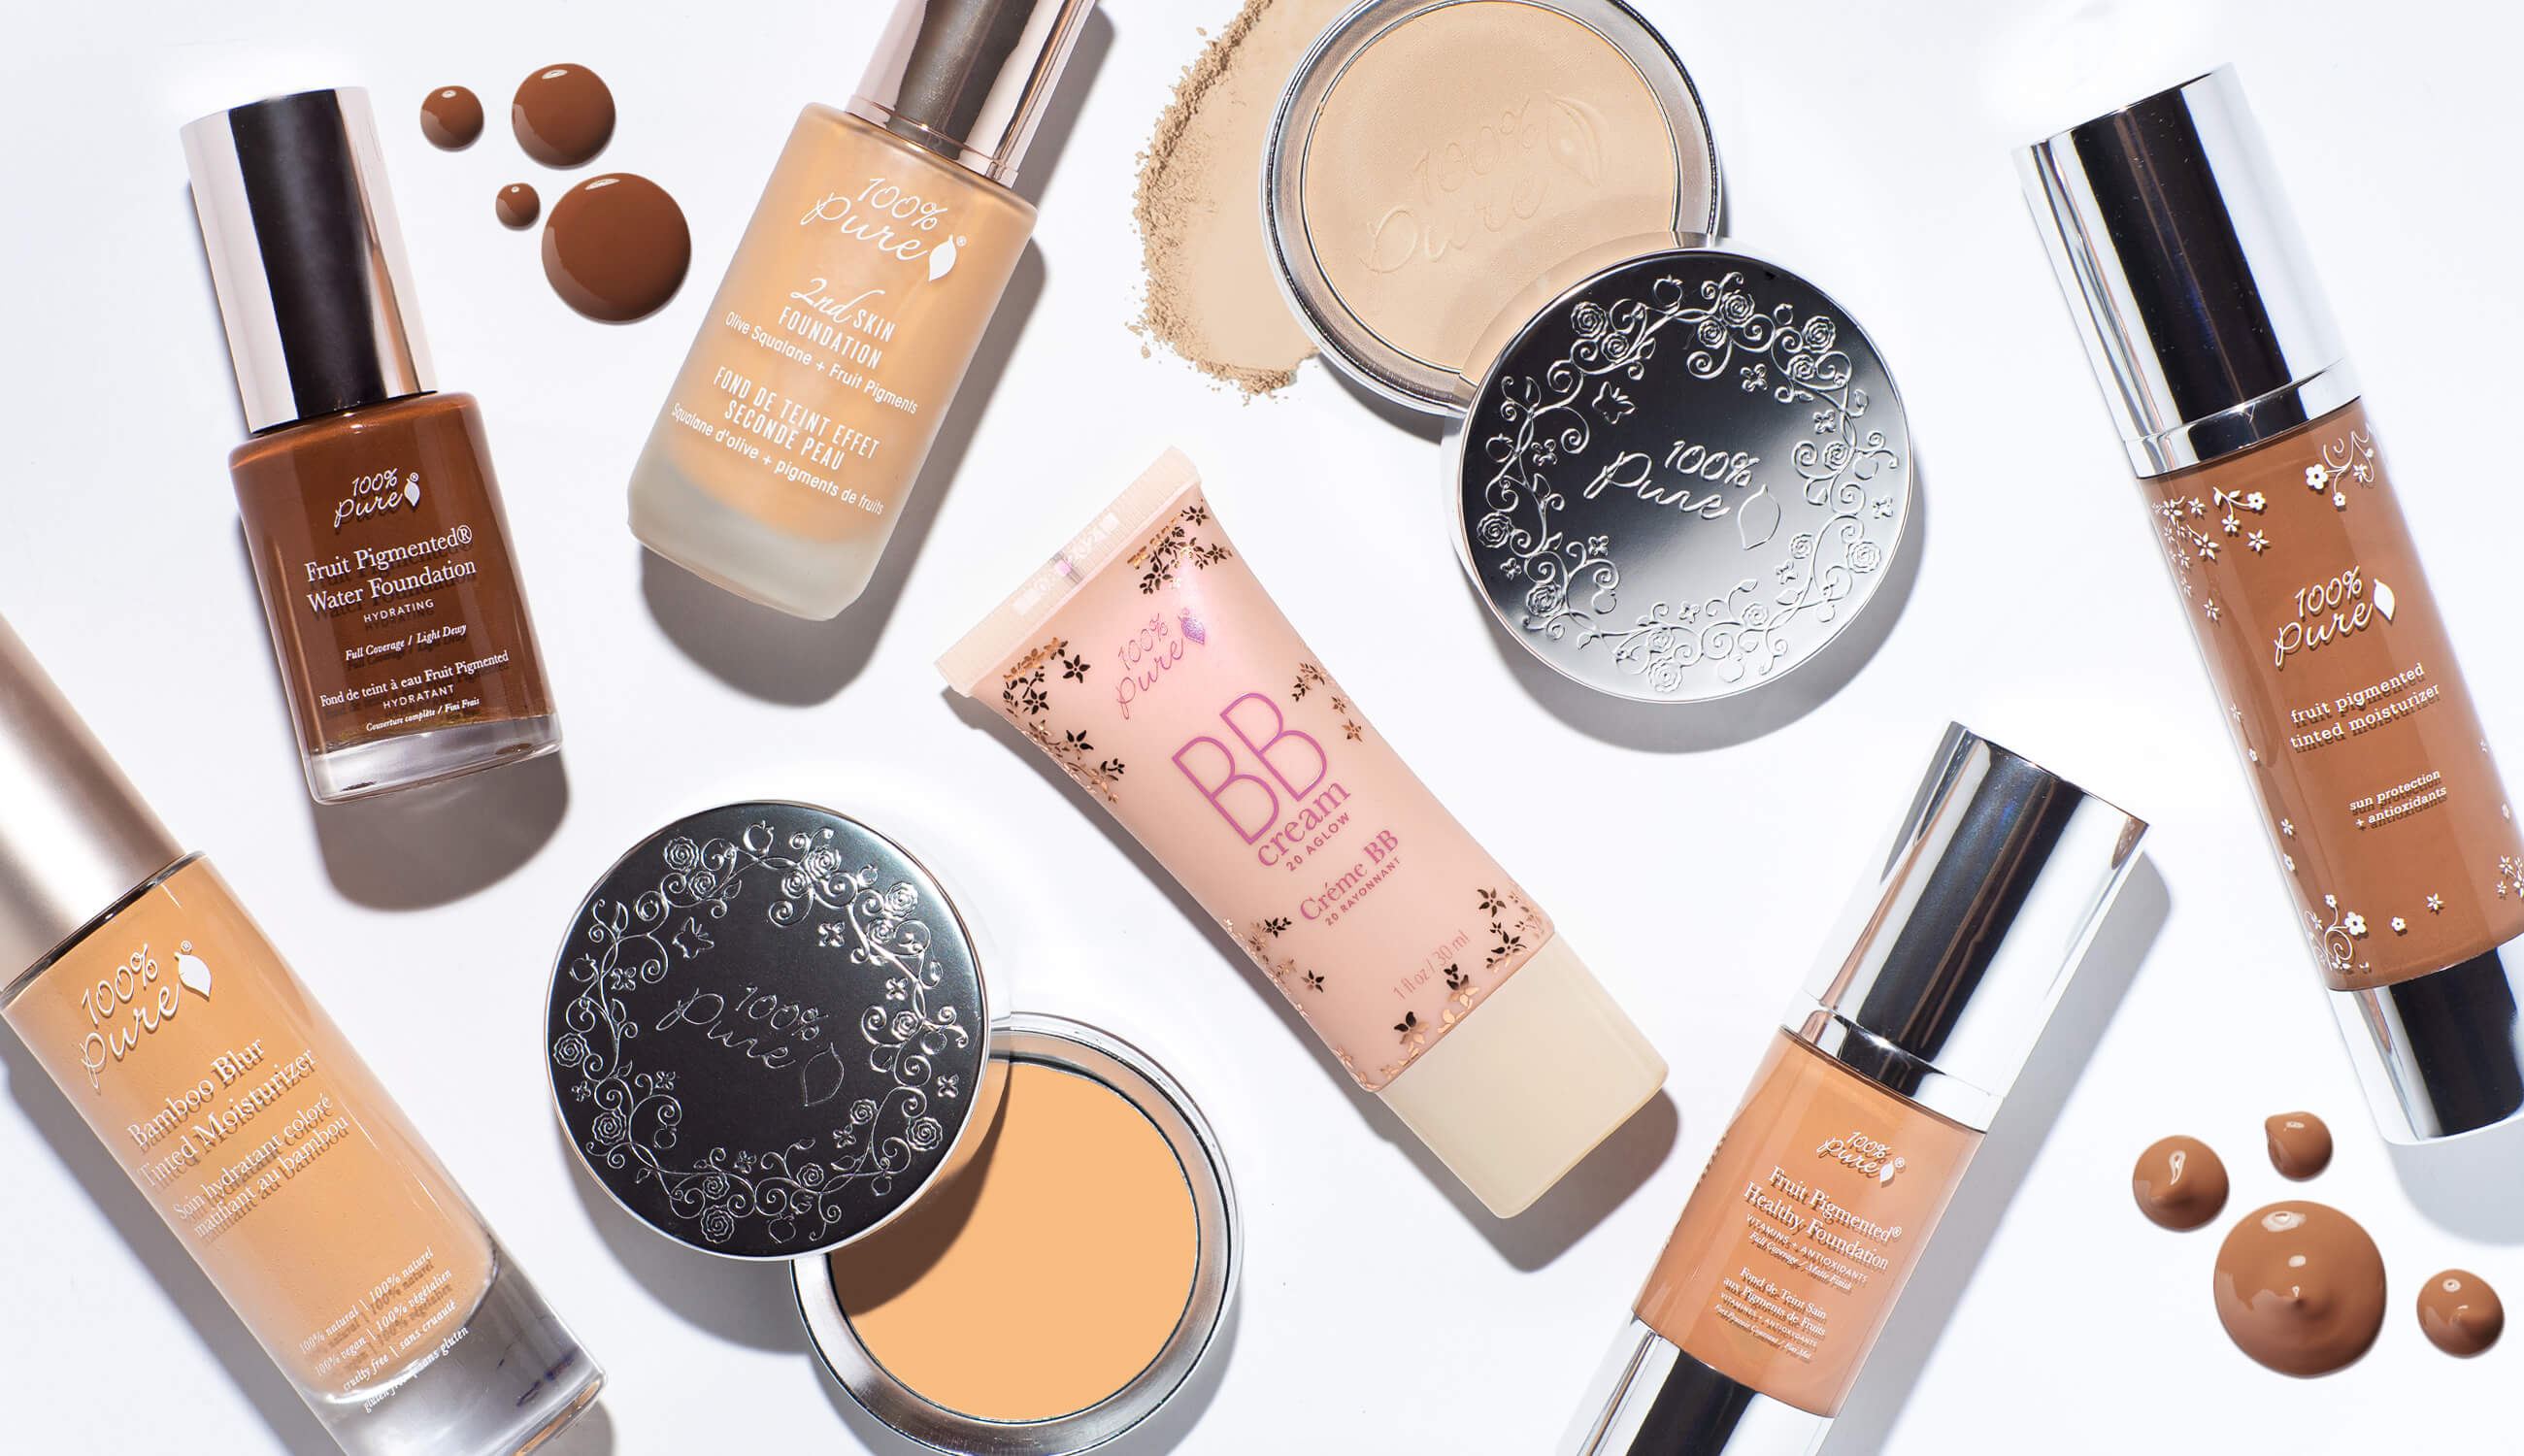 How To Choose The Right Foundation For Your Skin? - 4 Simple Tips